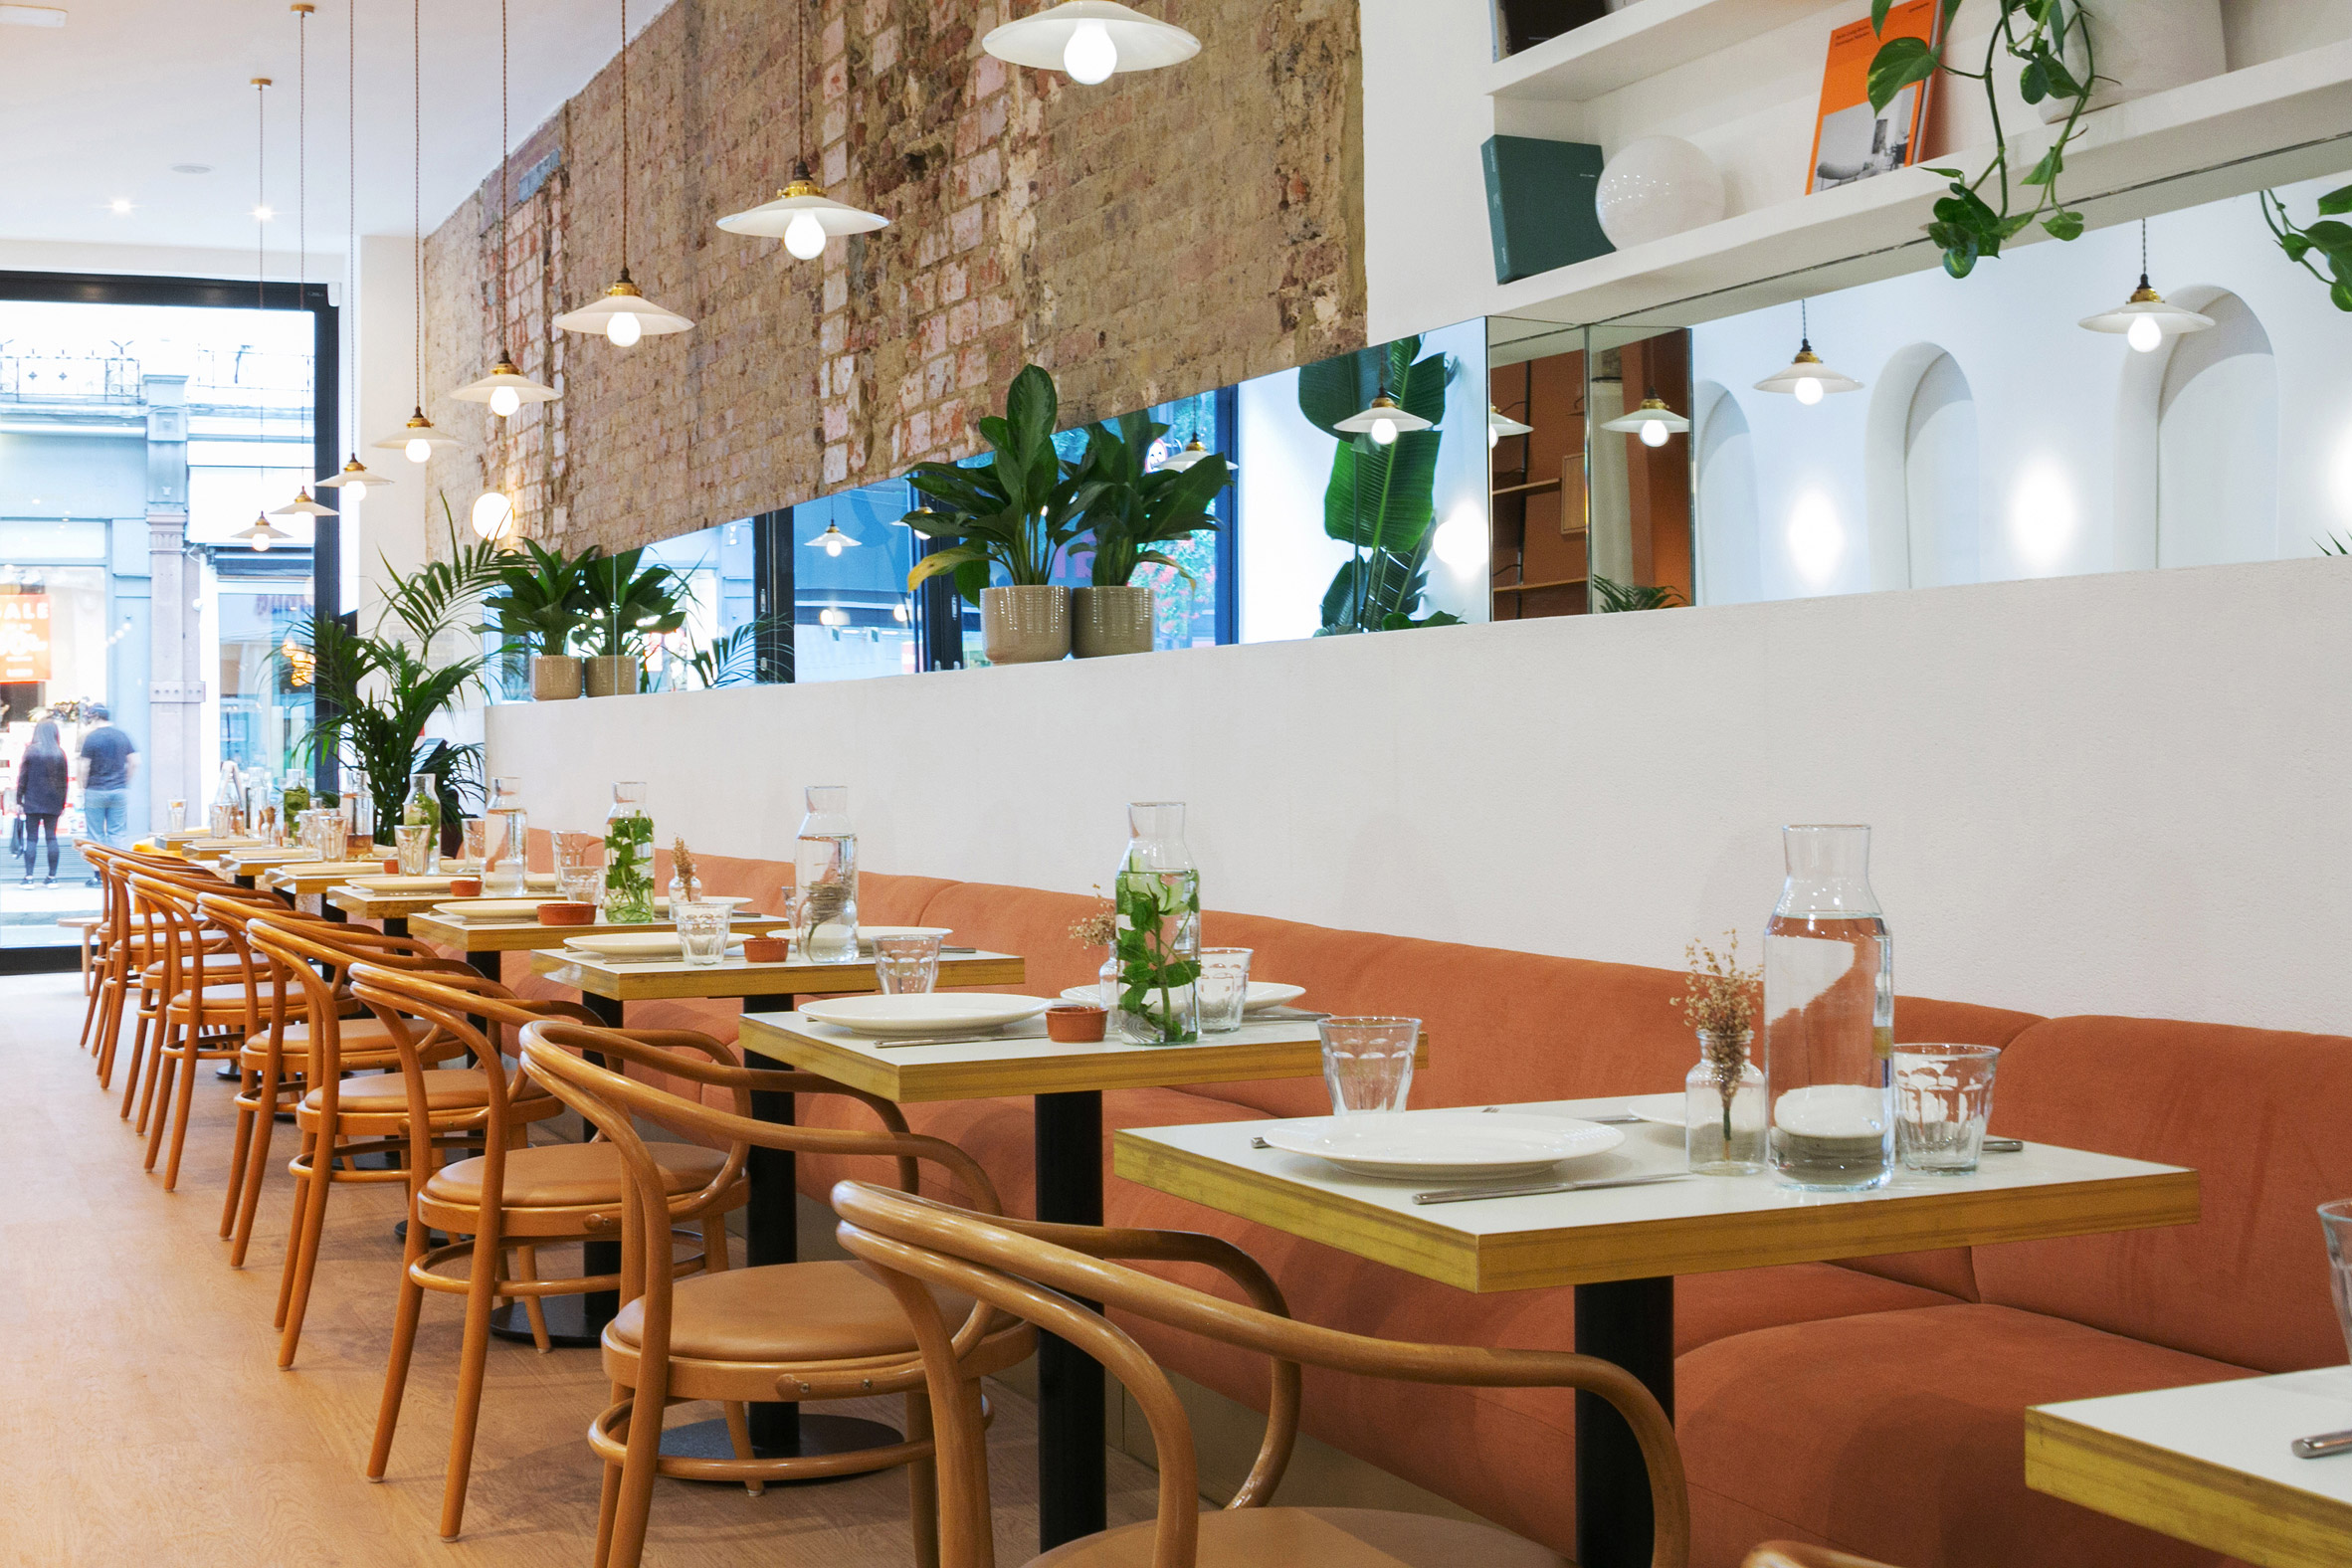 Dining area of Beam cafe in London